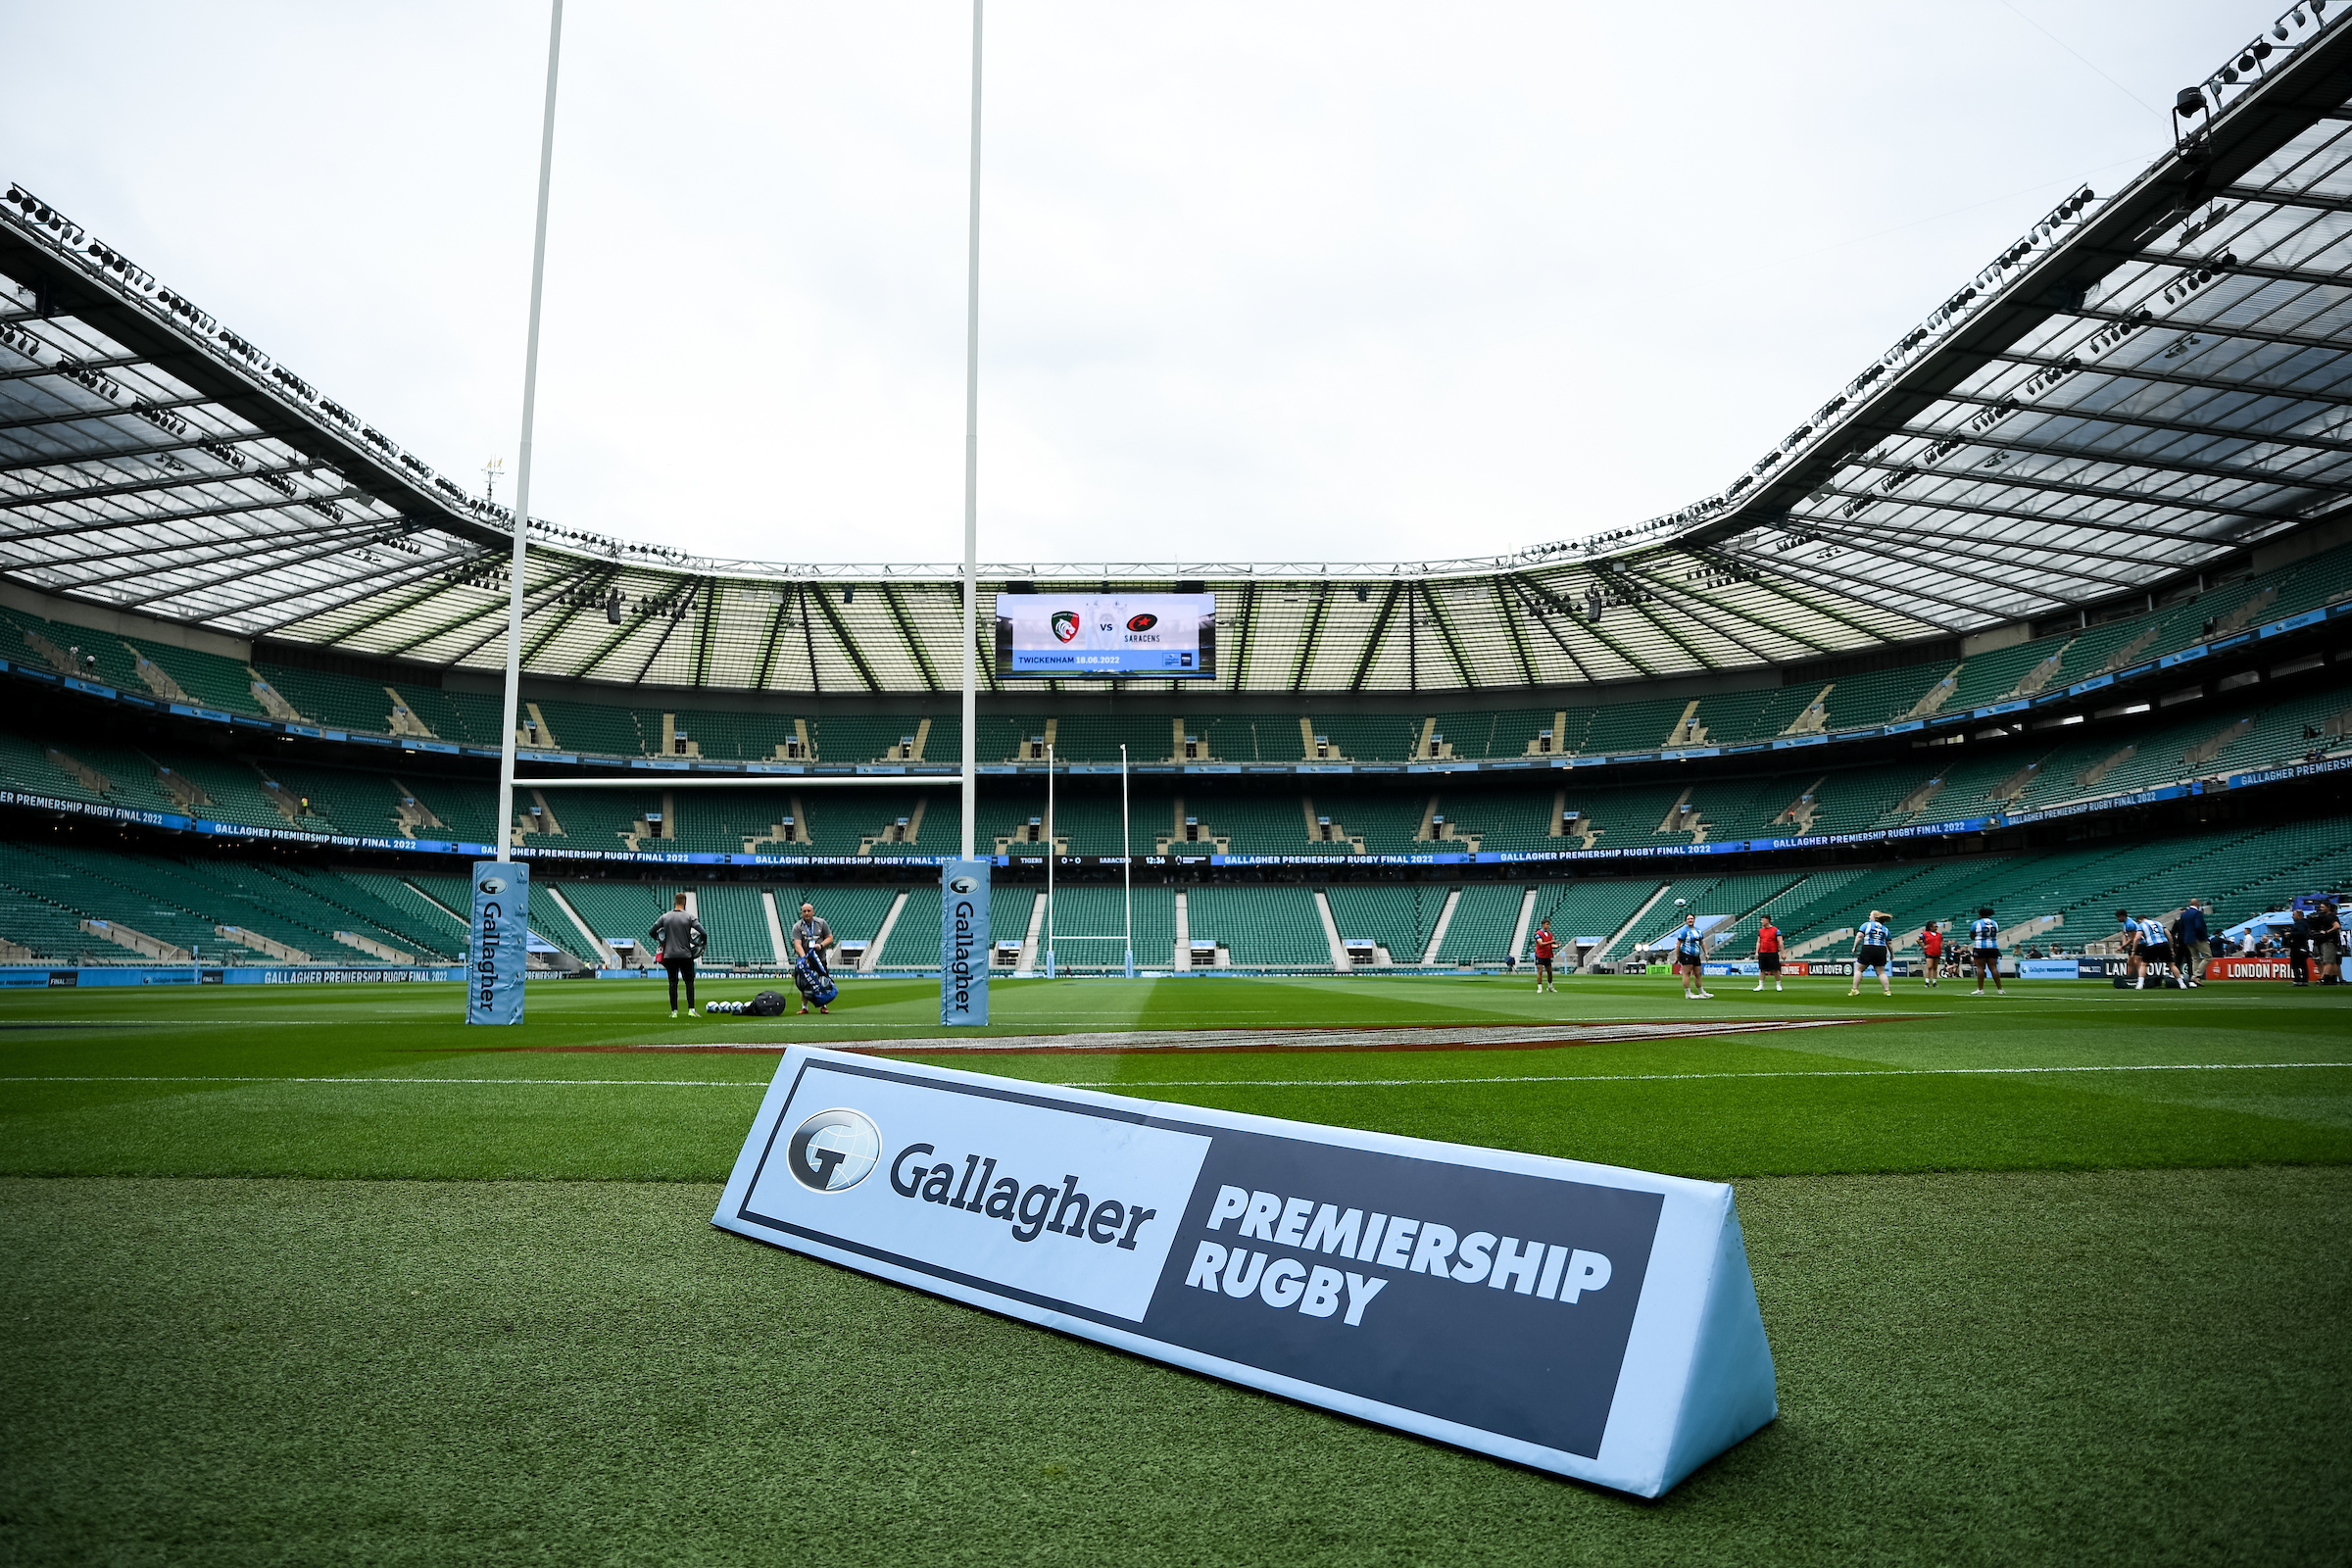 Gallagher Premiership games will go ahead as planned this weekend